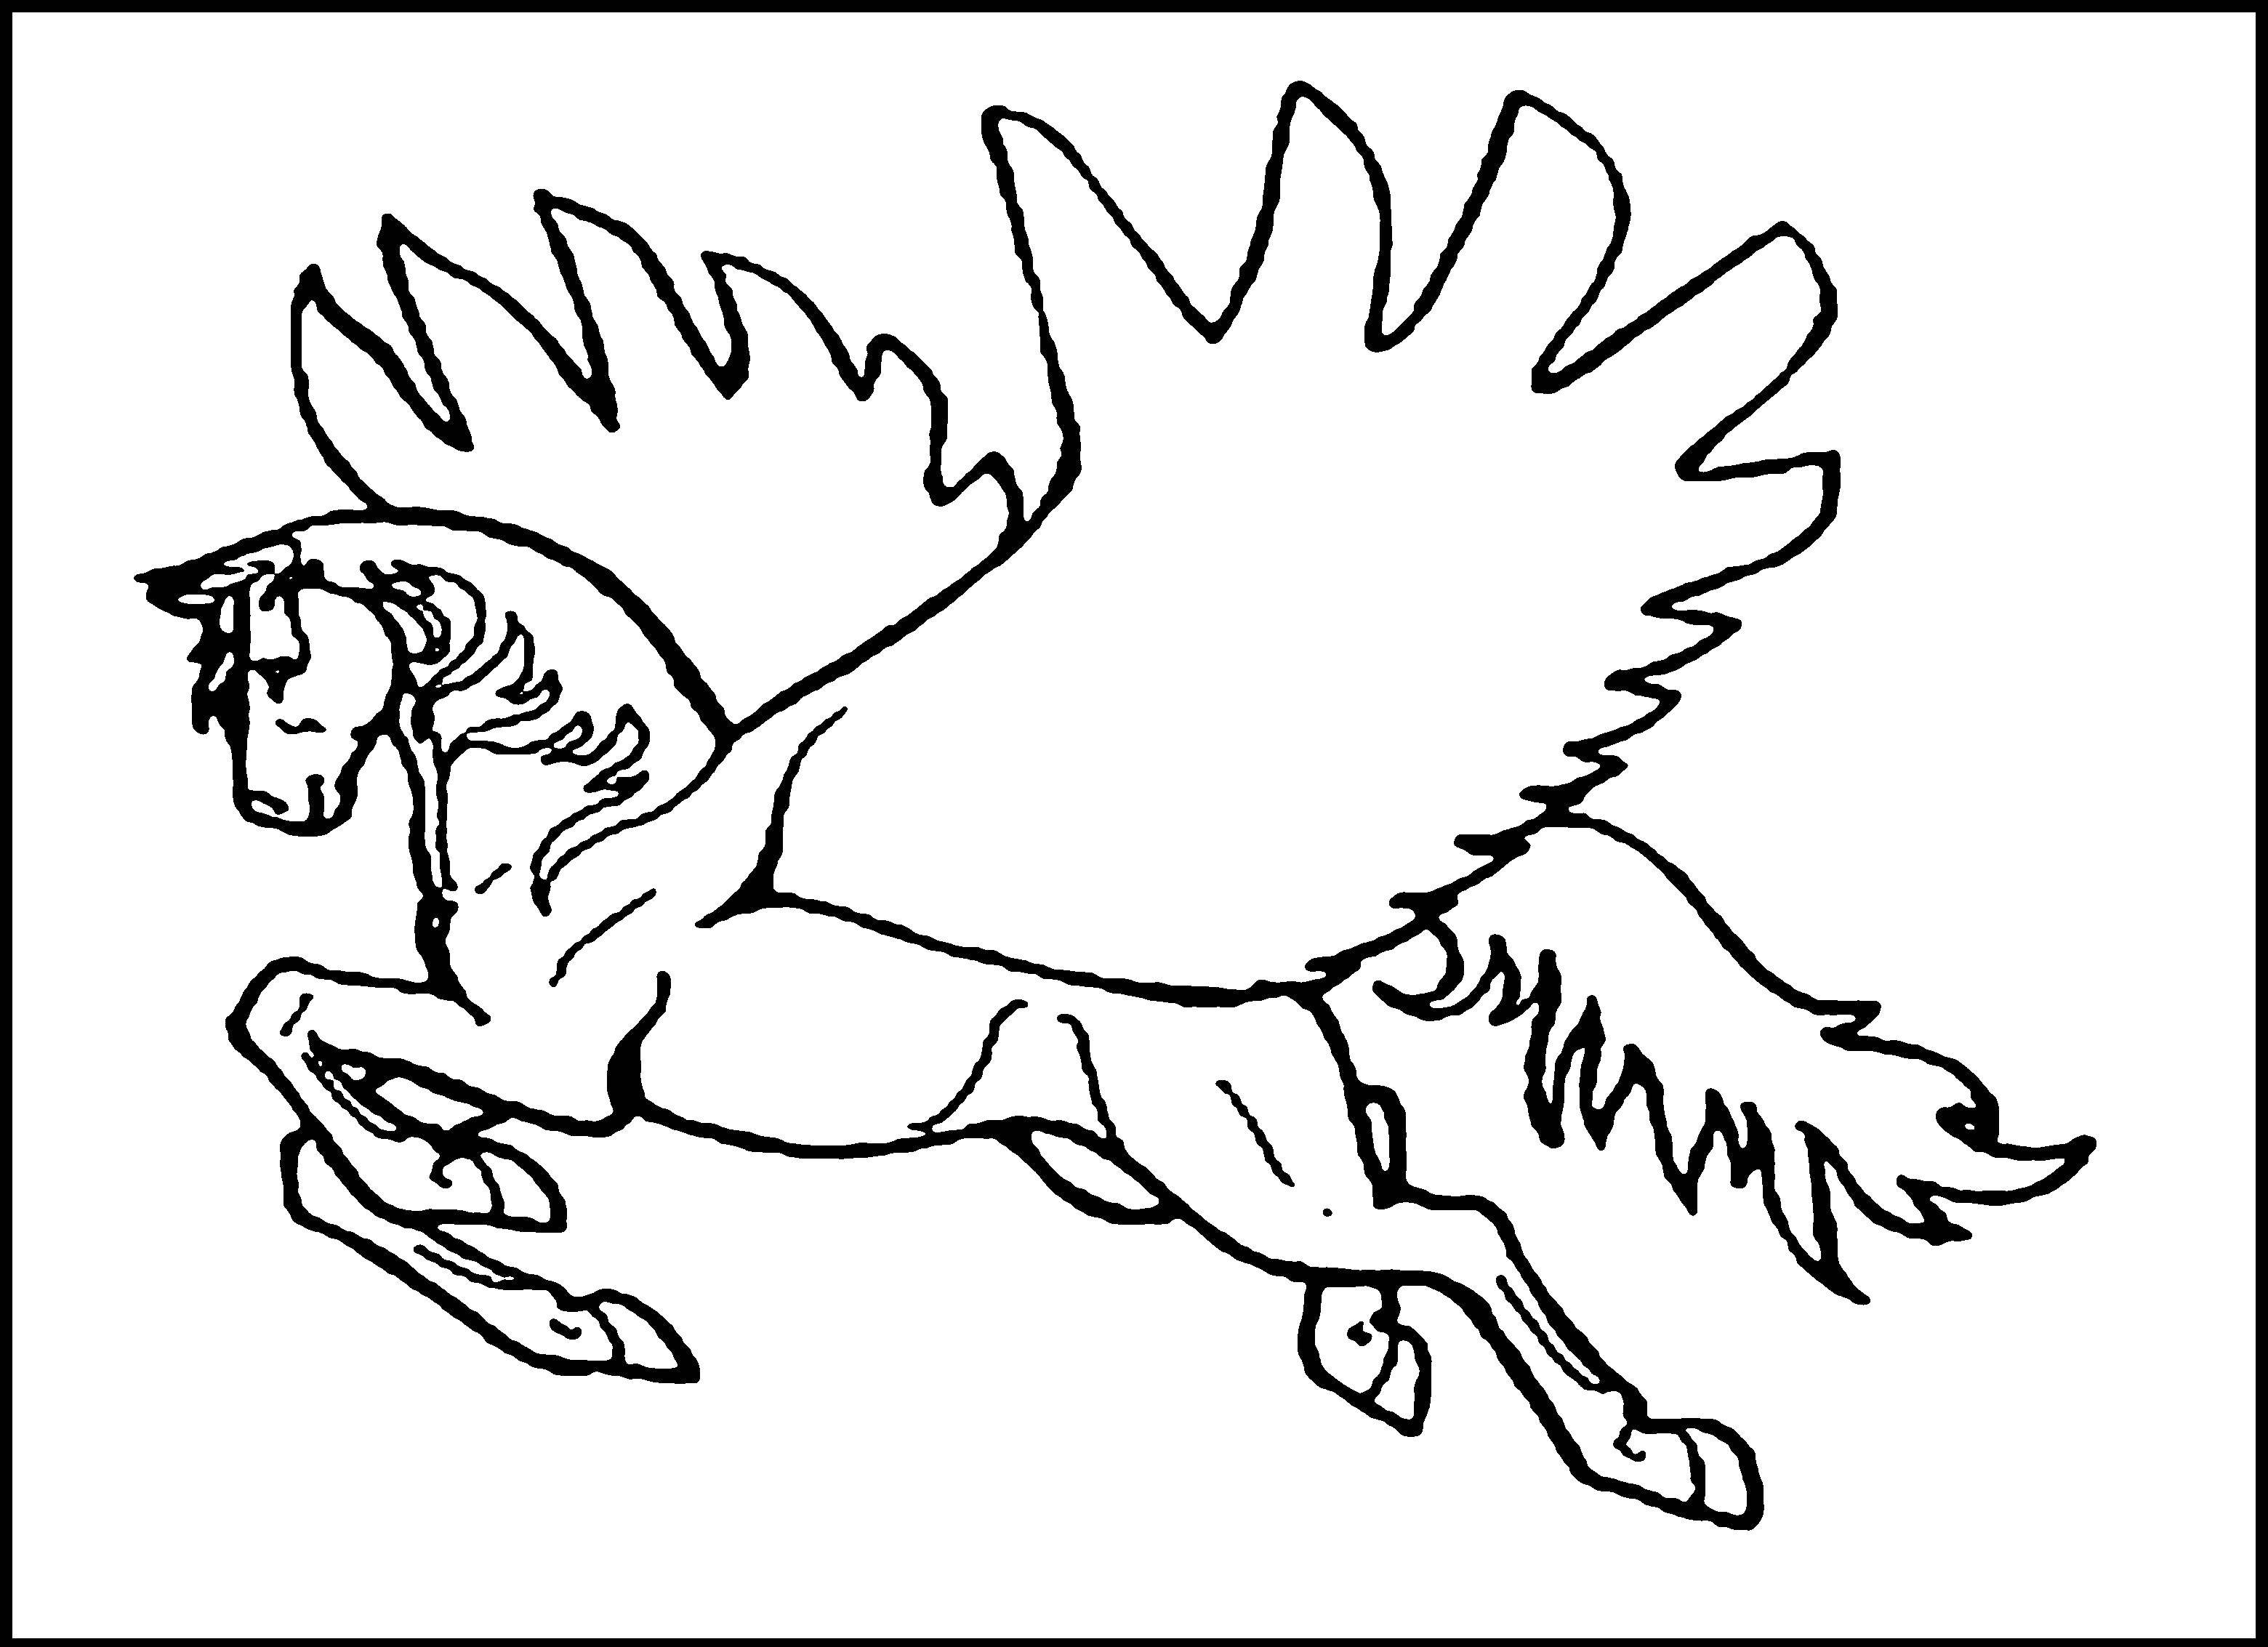 Coloring Flying Pegasus. Category coloring. Tags:  Magic create.